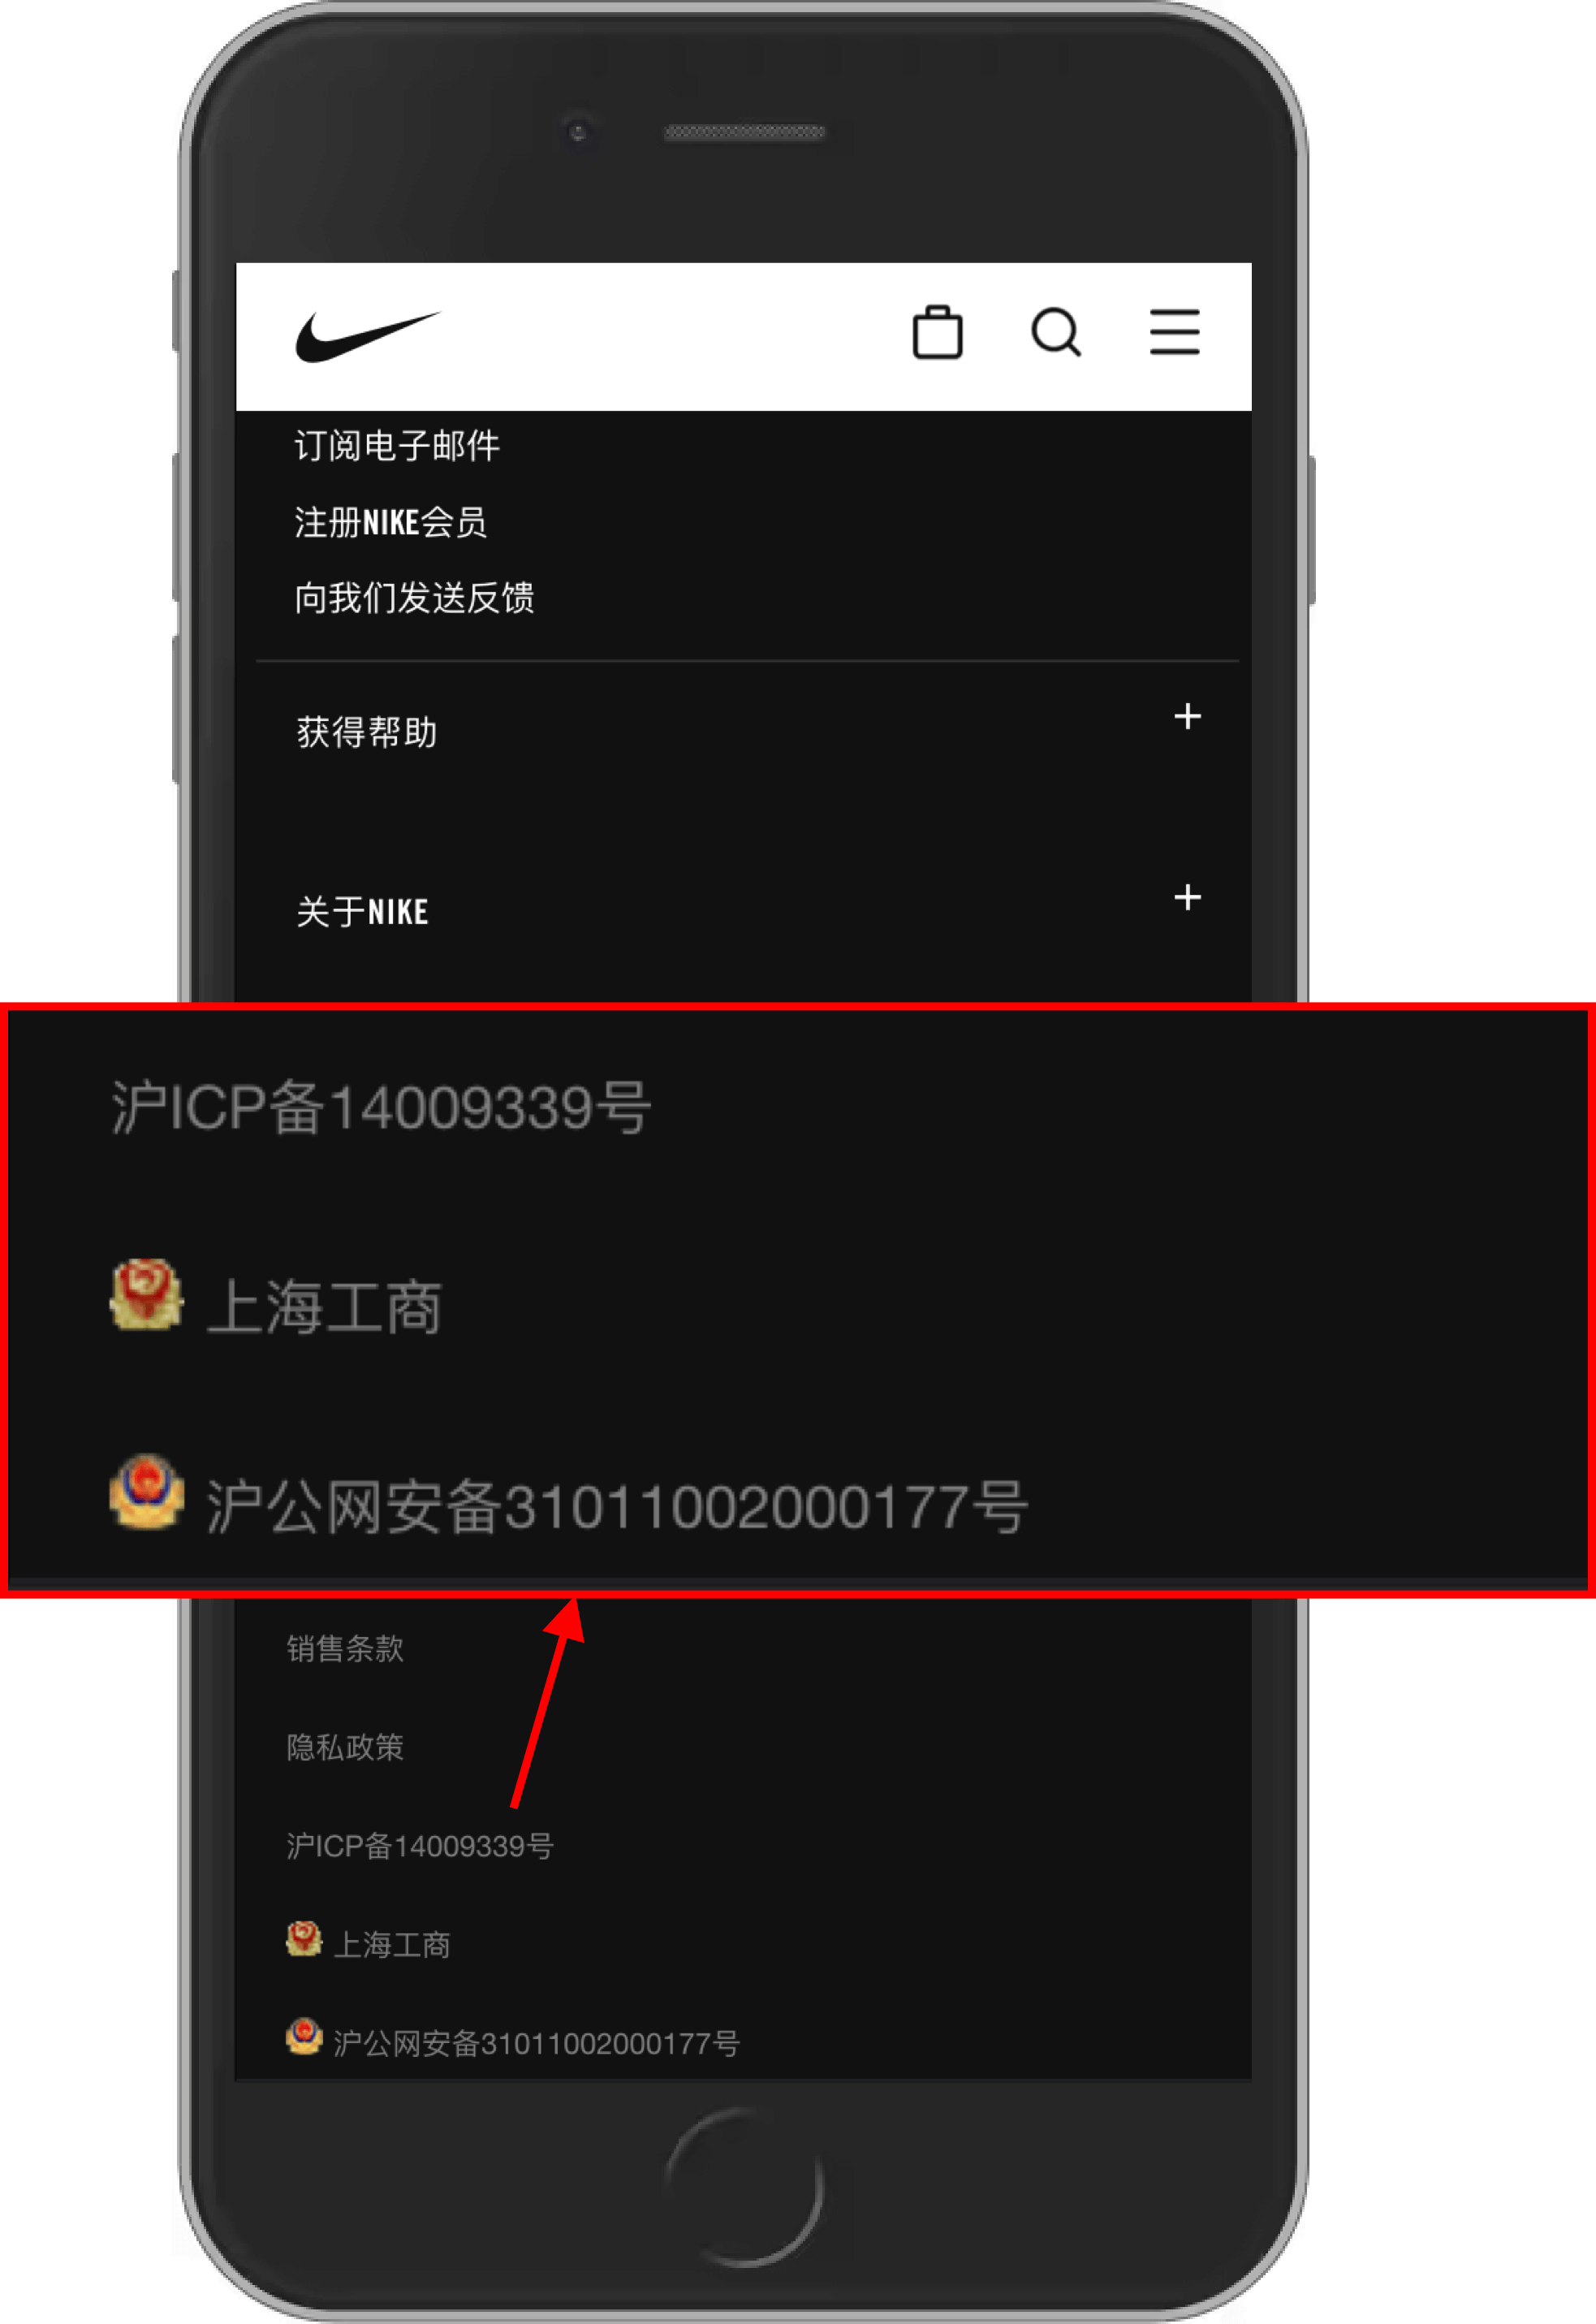 Screenshot to show Nike's website in China, with zoomed and highlighted ICP number in red. You can find legal licenses showed at the footer of most legitimately hosted websites in China.